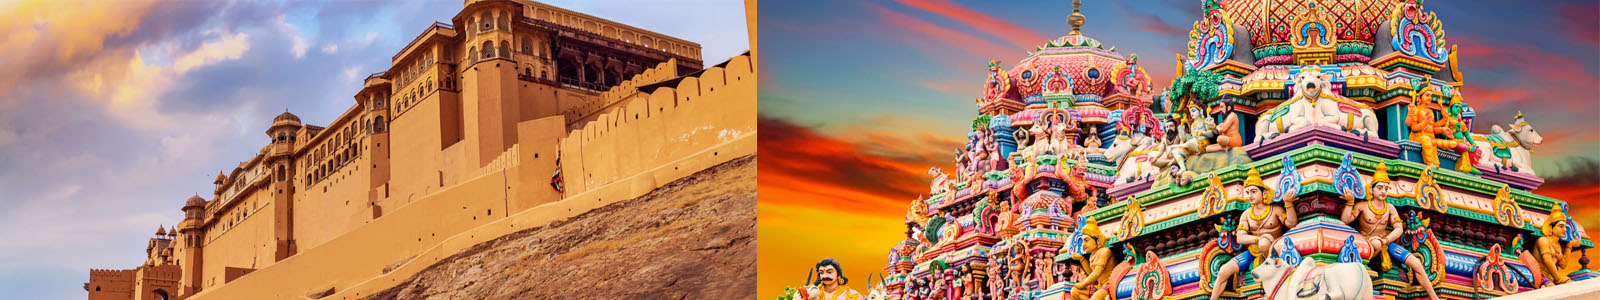 Rajasthan & South India Tours